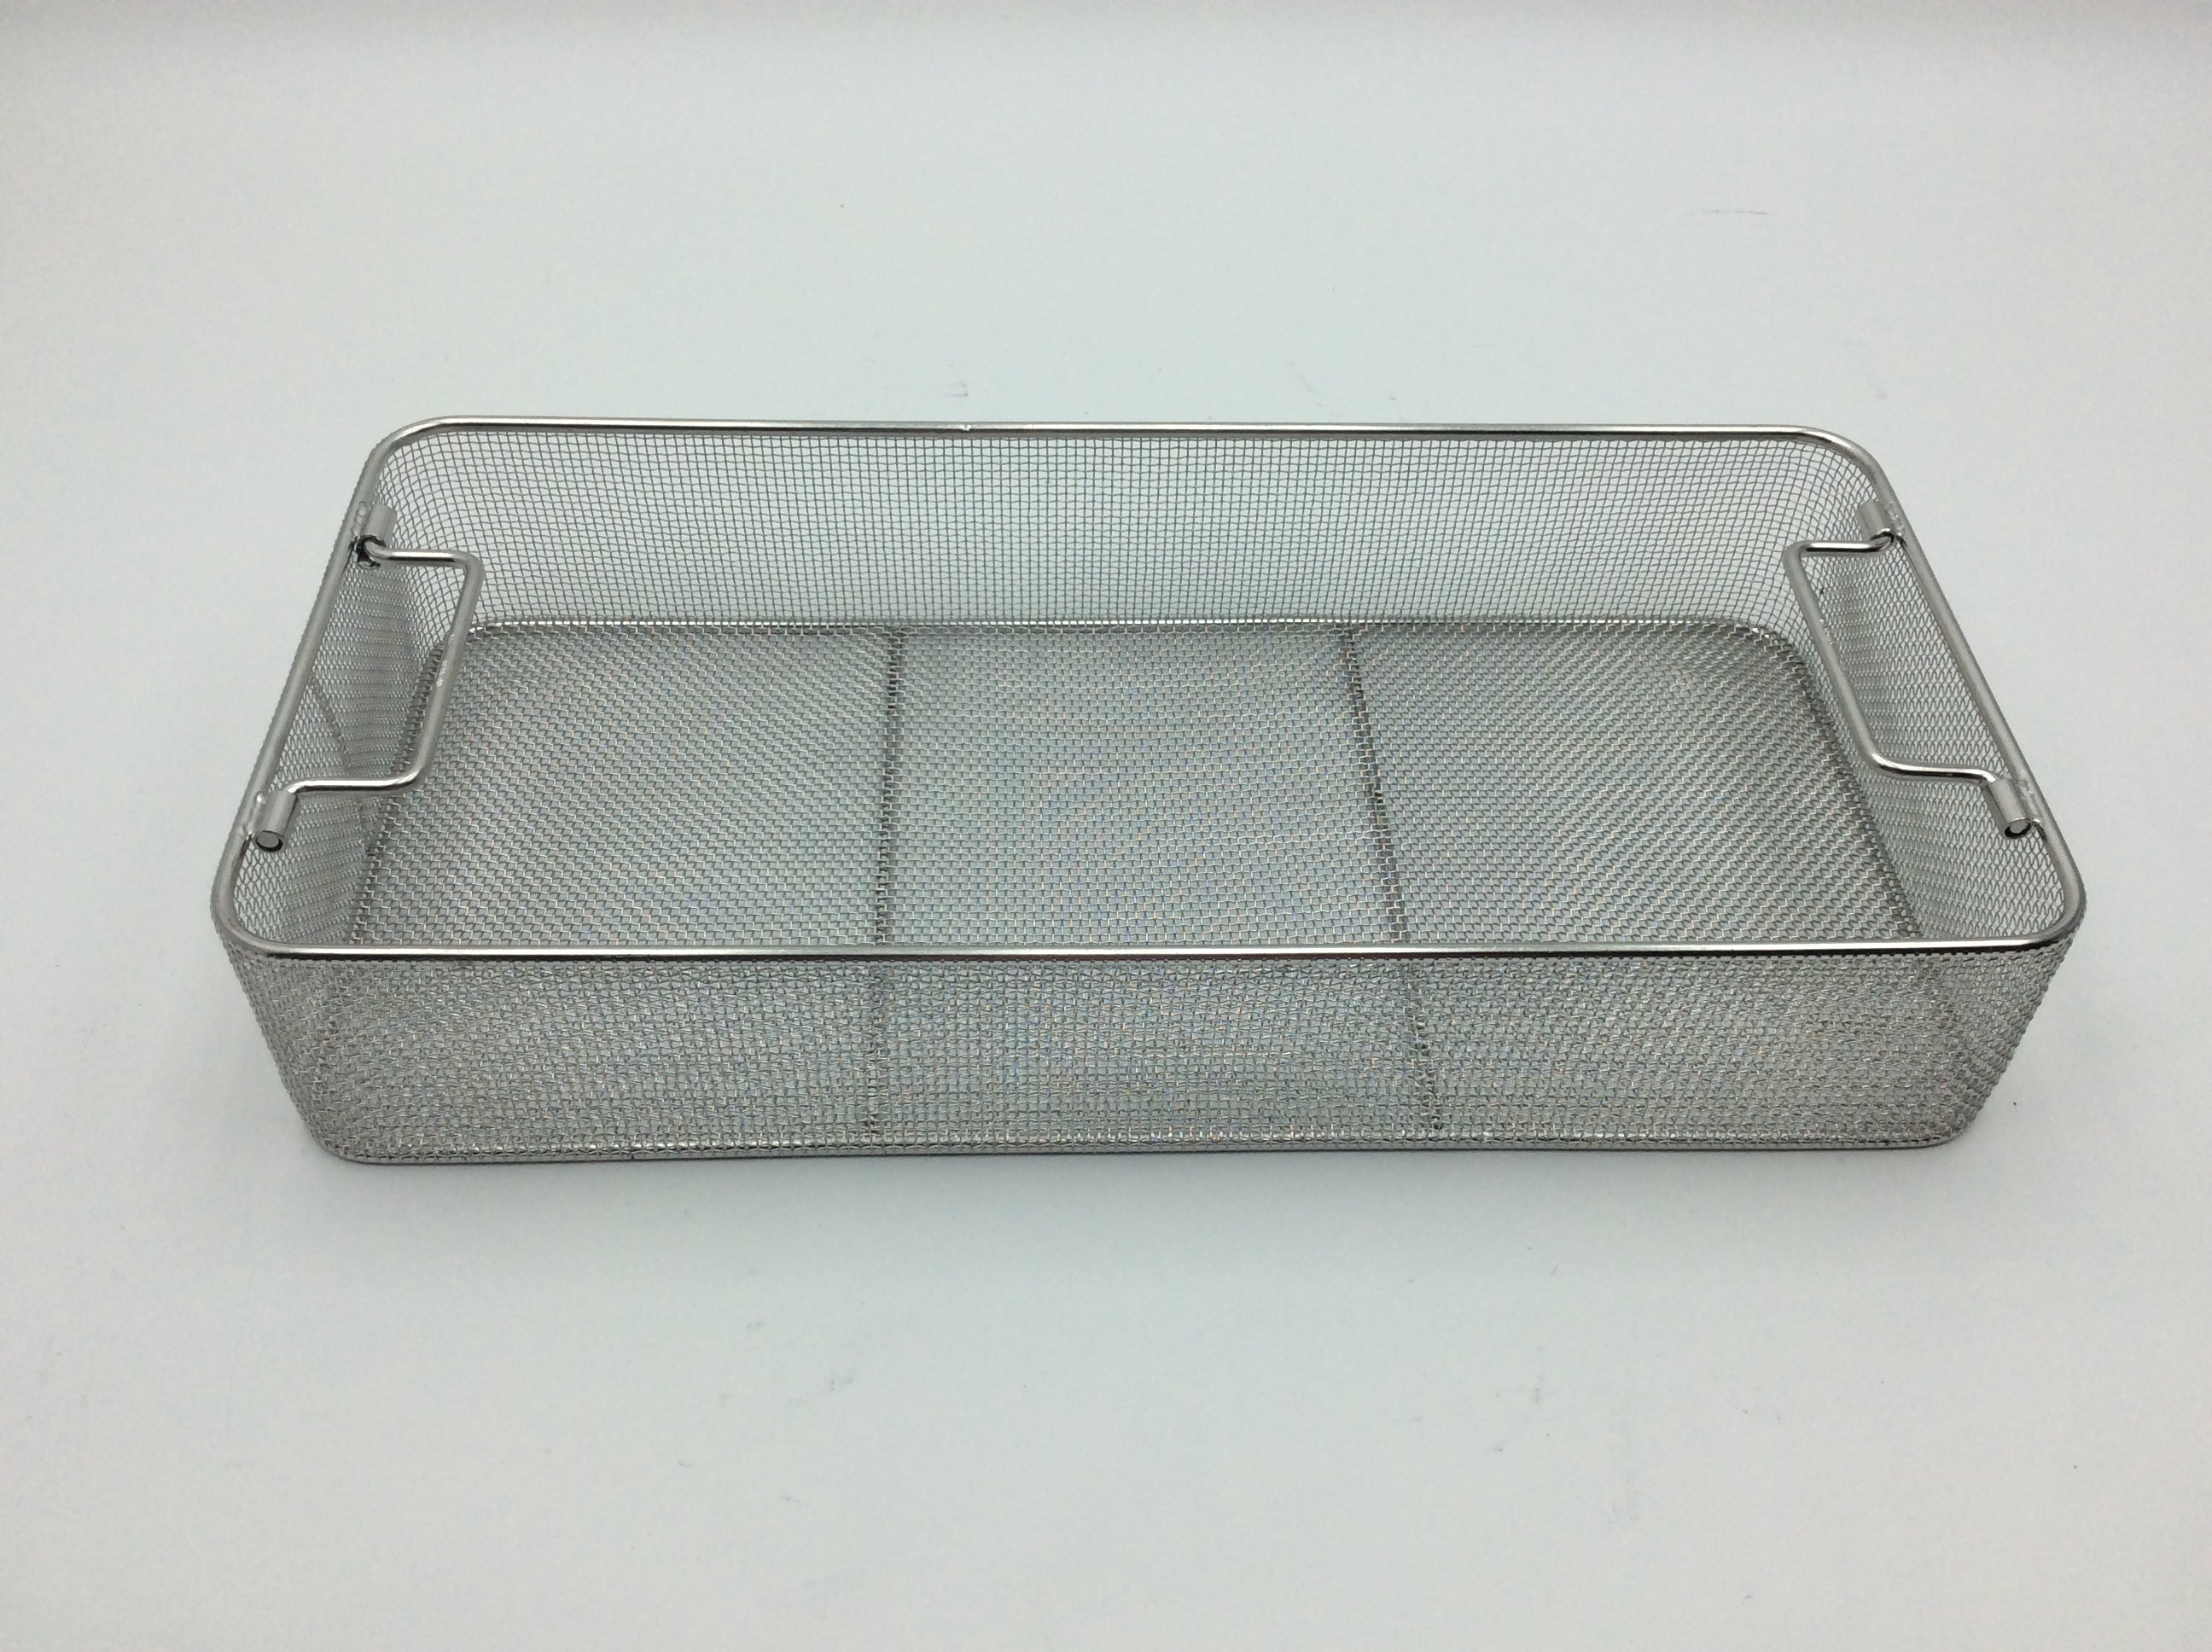 Load image into Gallery viewer, A Biomedical Service Aesculap Sterilization Container 78532 w/ Basket &amp; Lid JK489 size 22x11x5 445.00